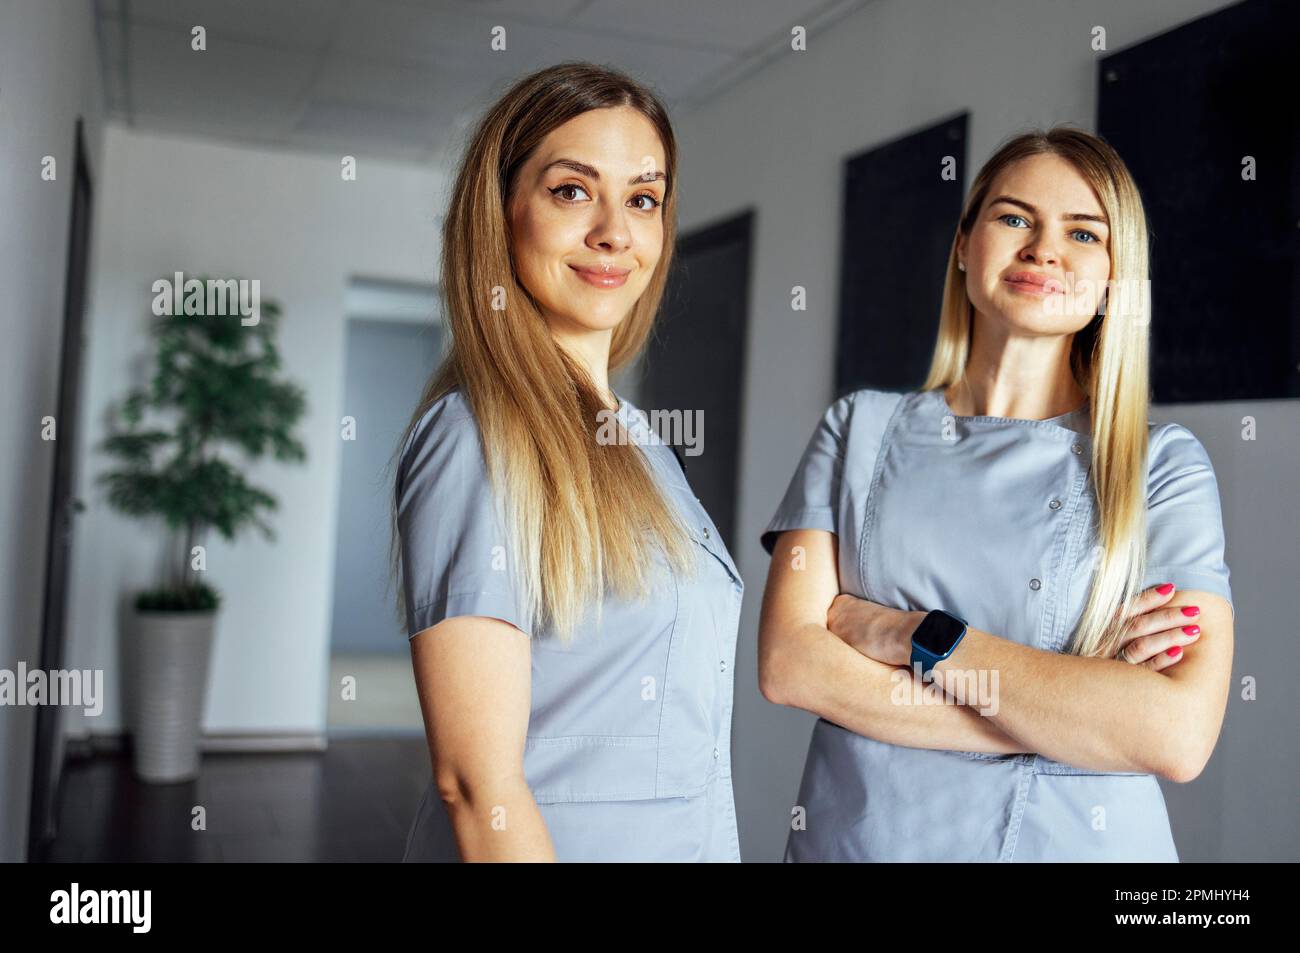 Beautiful smiling female doctors in medical uniform stands near the window in clinic. Young nurse is talking. Sunny day. Light interior. Copy space. Stock Photo